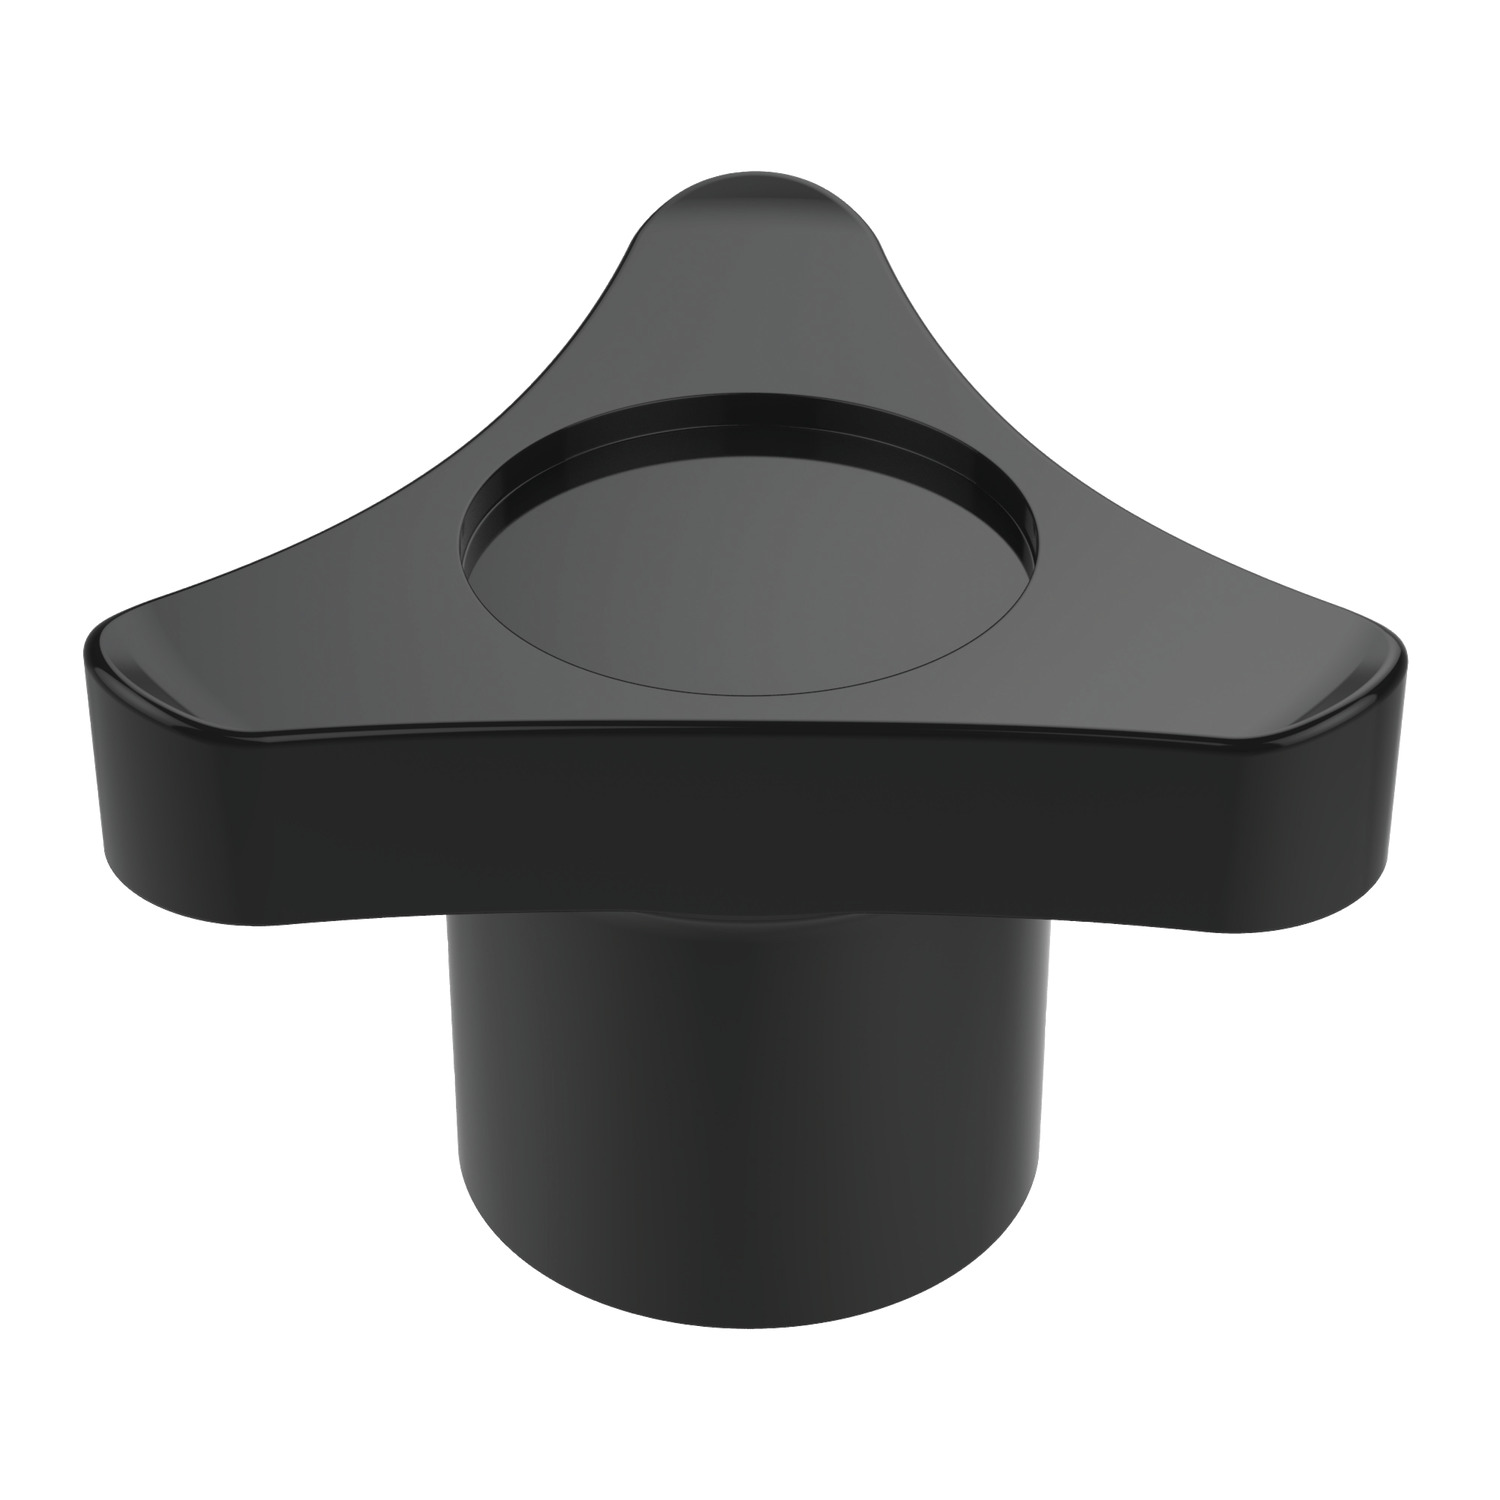 Three Lobed Knobs Wixroyd lobed knobs are well suited to any original equipment manufacturer application no matter the industry.